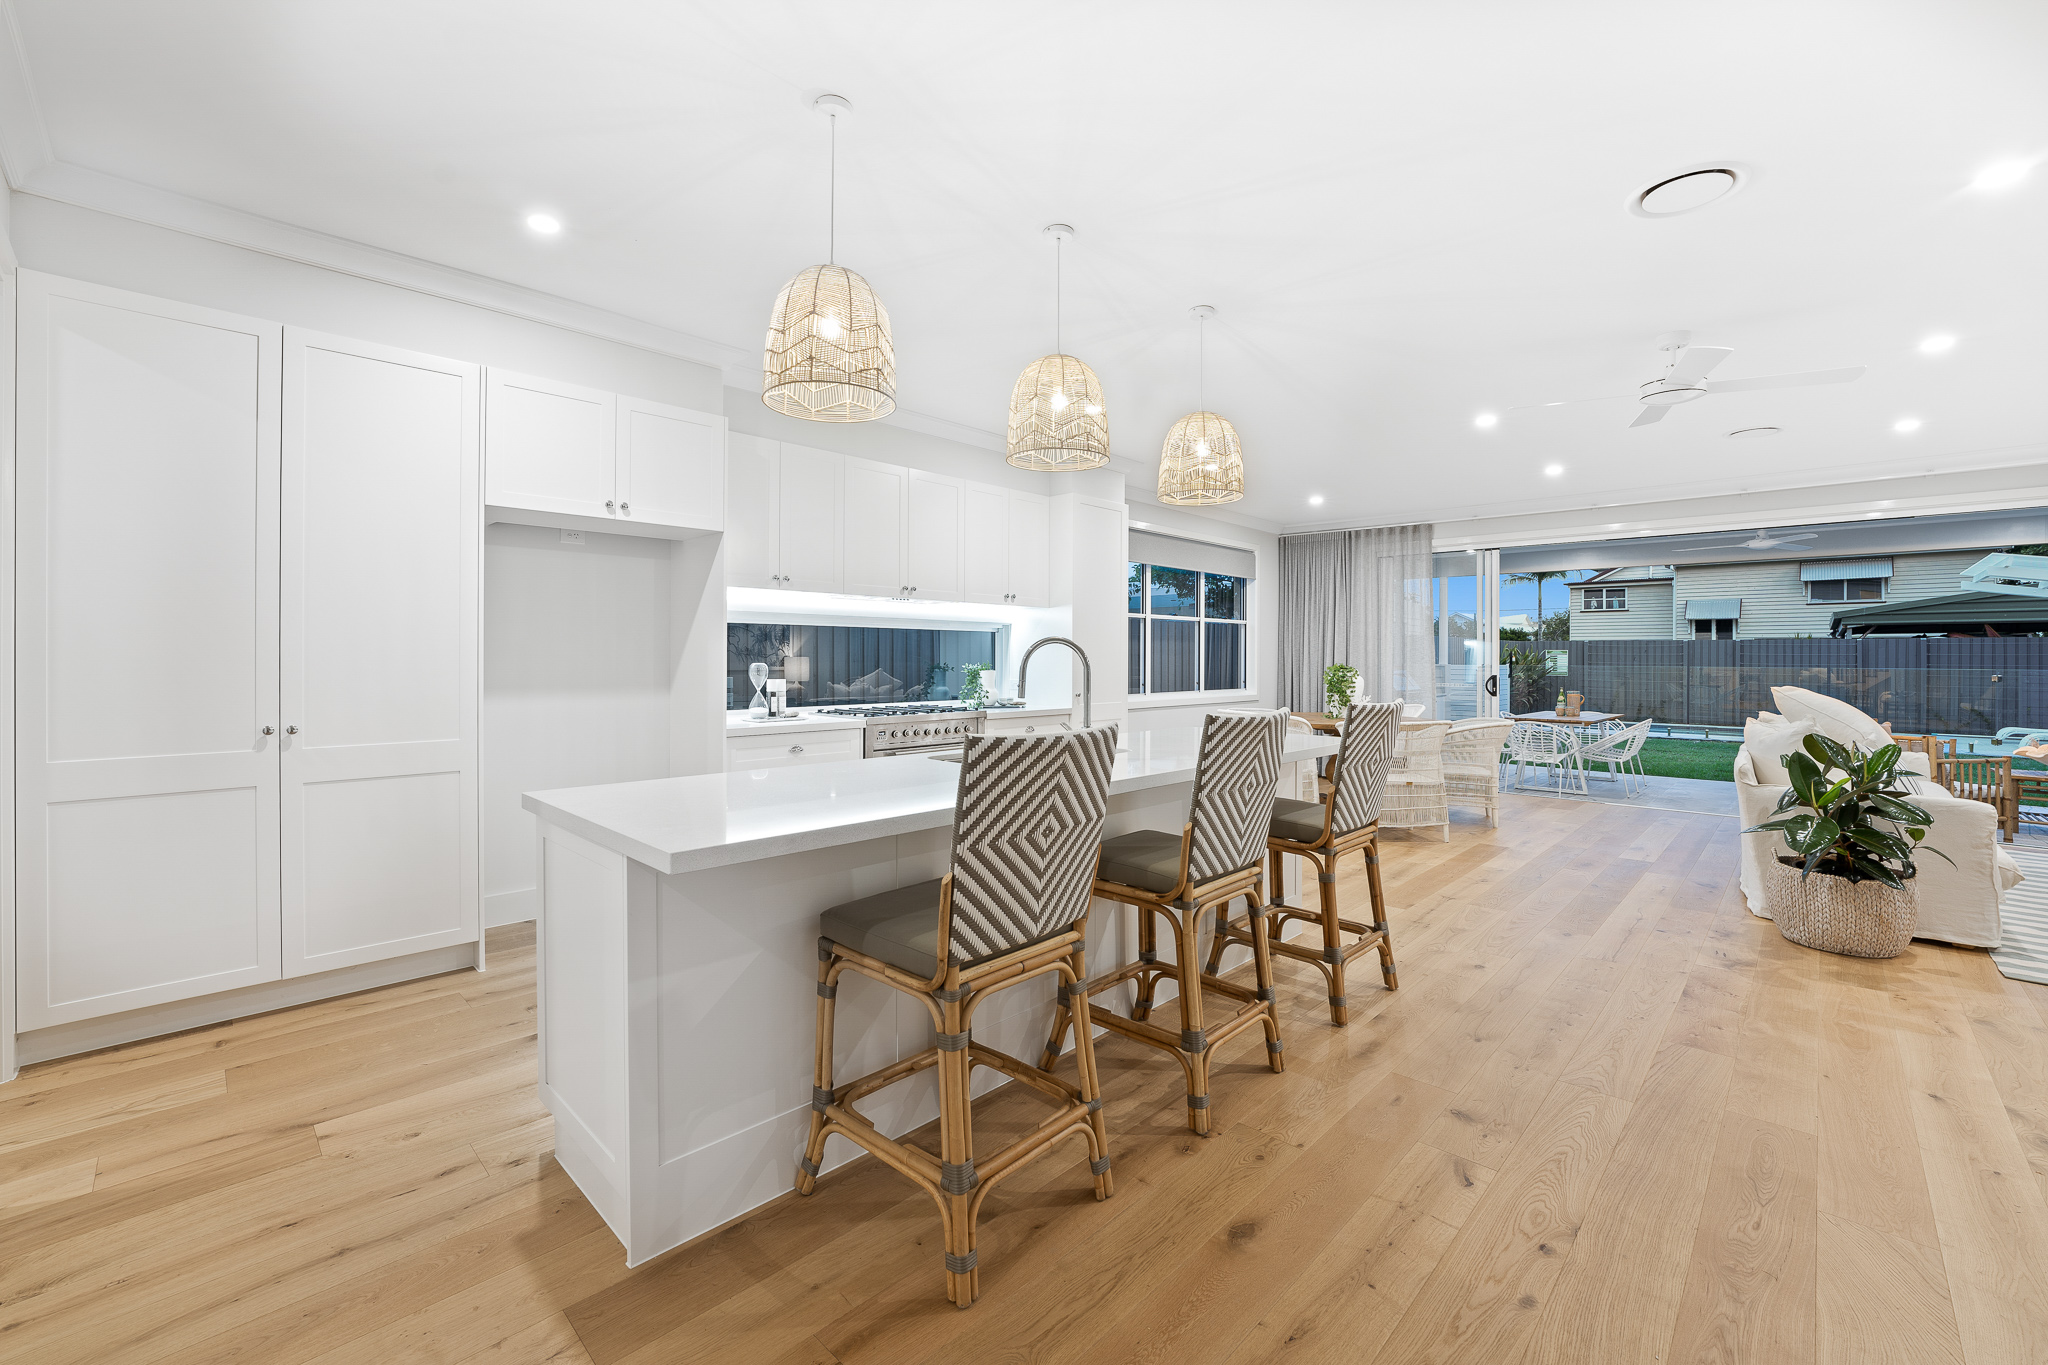 Bright and spacious kitchen island | Featured image for the Blindo x Alpha Building & Construction collab